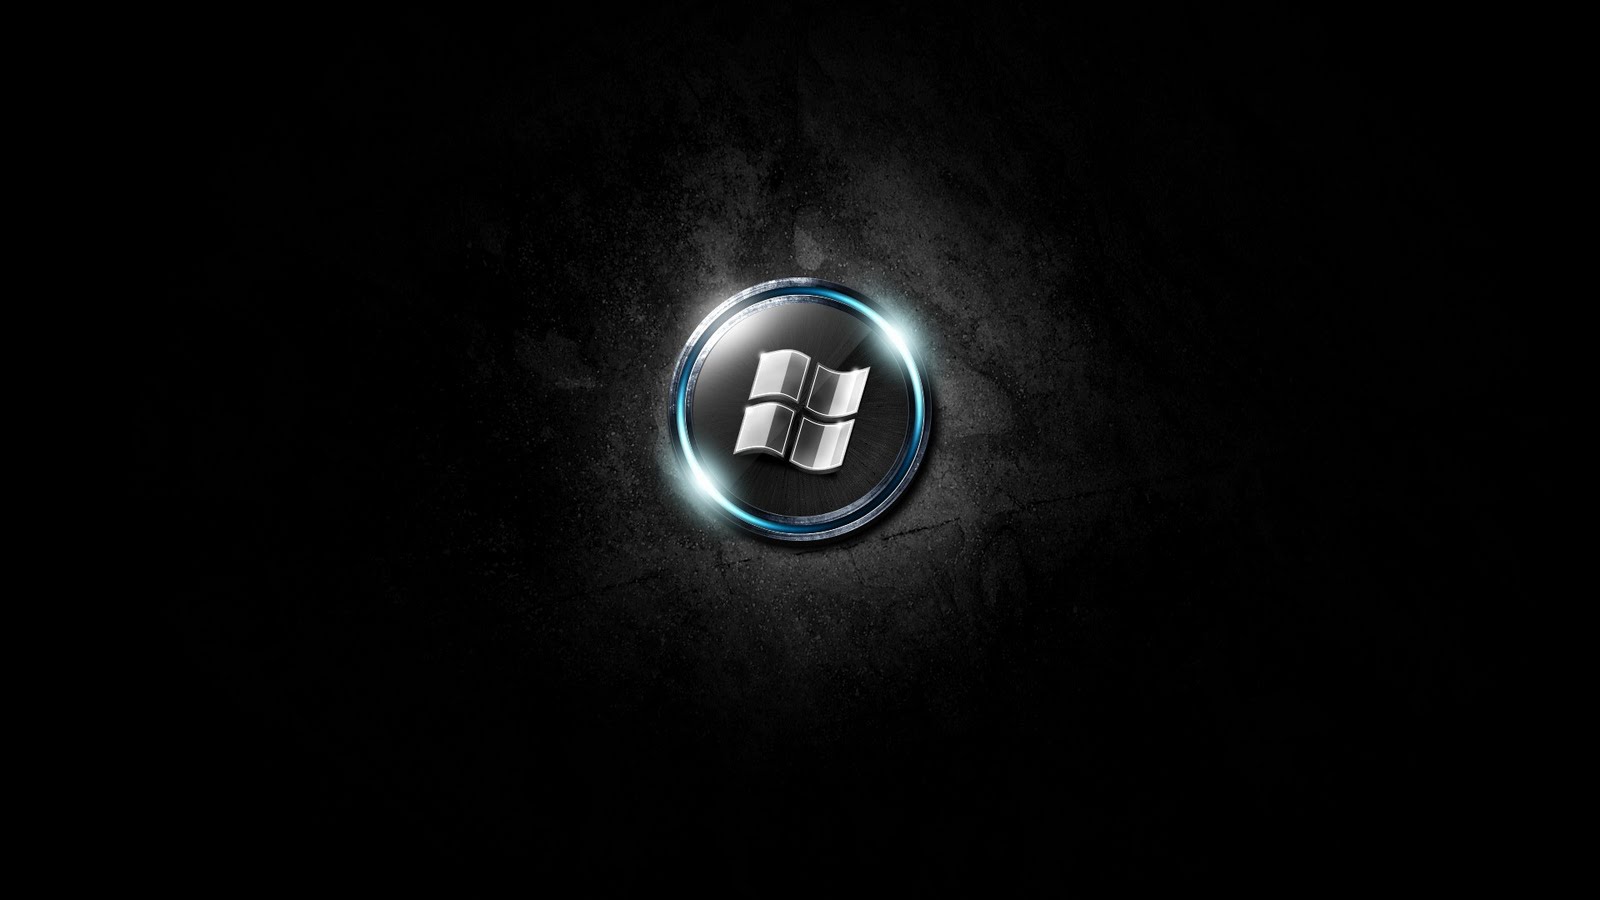 cool windows logo full hd wallpaper is a great wallpaper for your